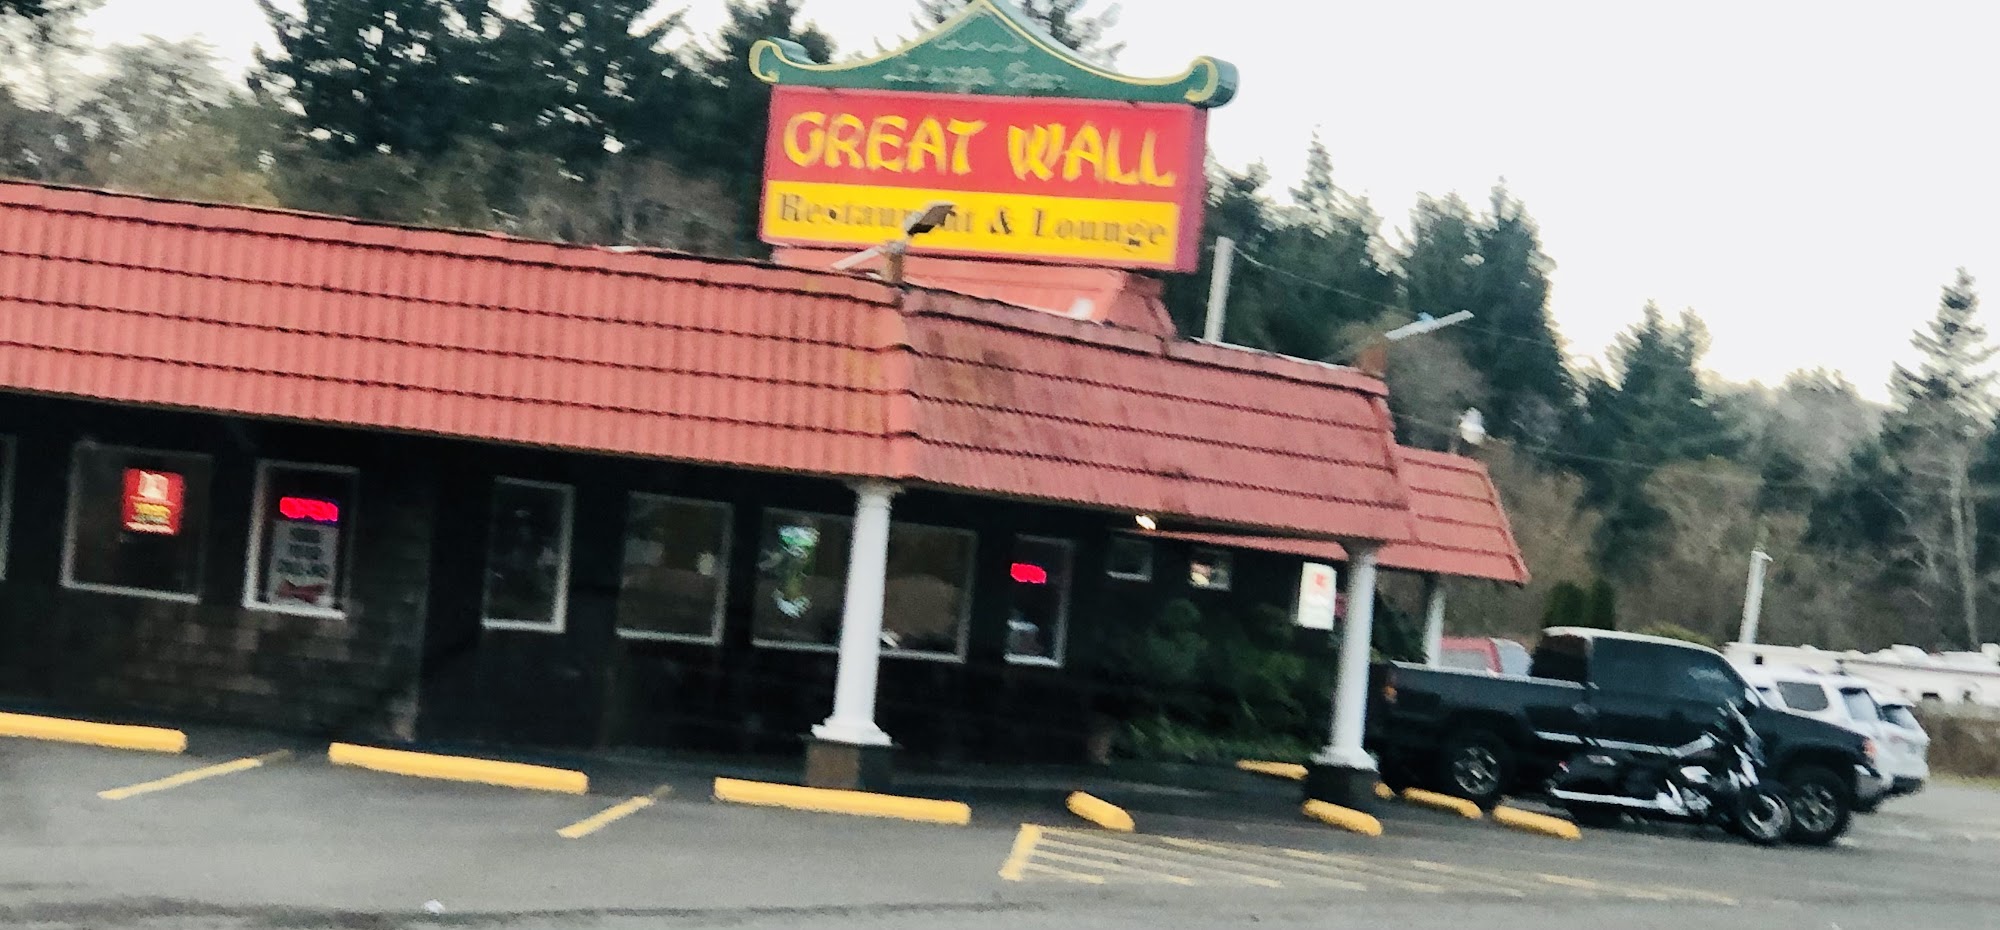 The Great Wall Restaurant